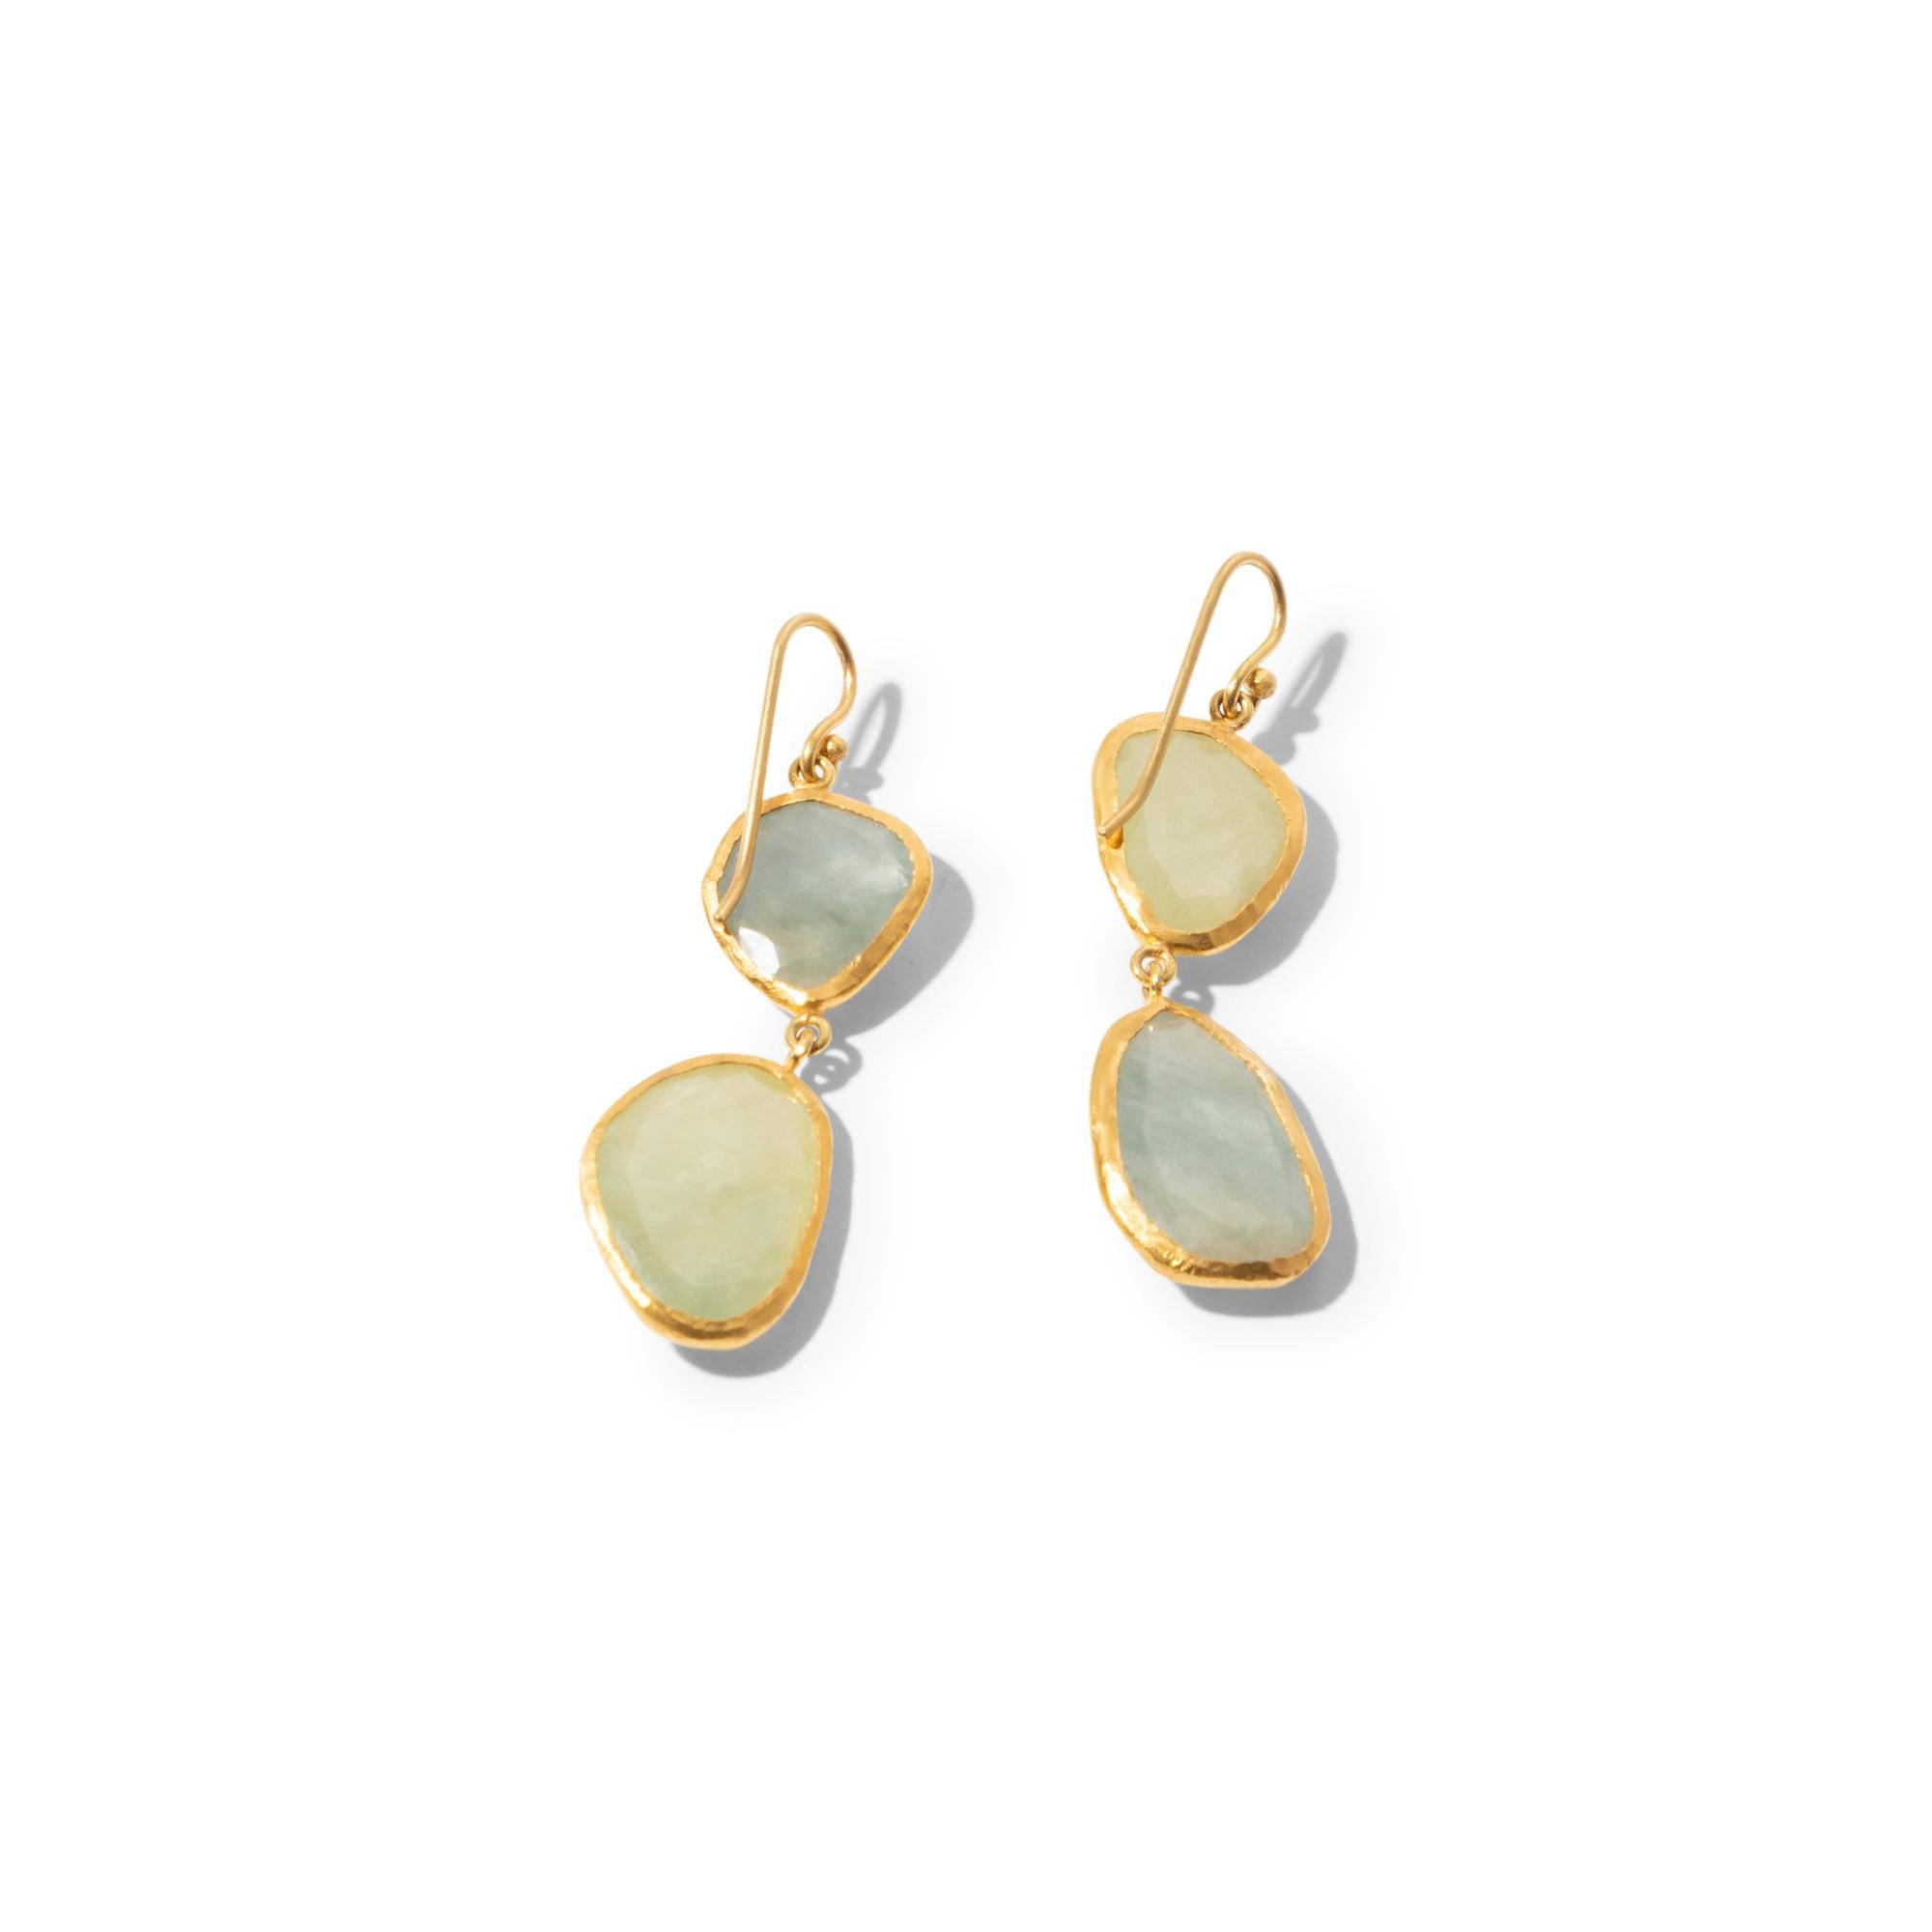 This pair of hand-made earrings oozes understated elegance. The soft green hues and the modern cut of the gemstones makes it a wearable piece which transitions easily from day to night. The large, natural and untreated green sapphires (total weight